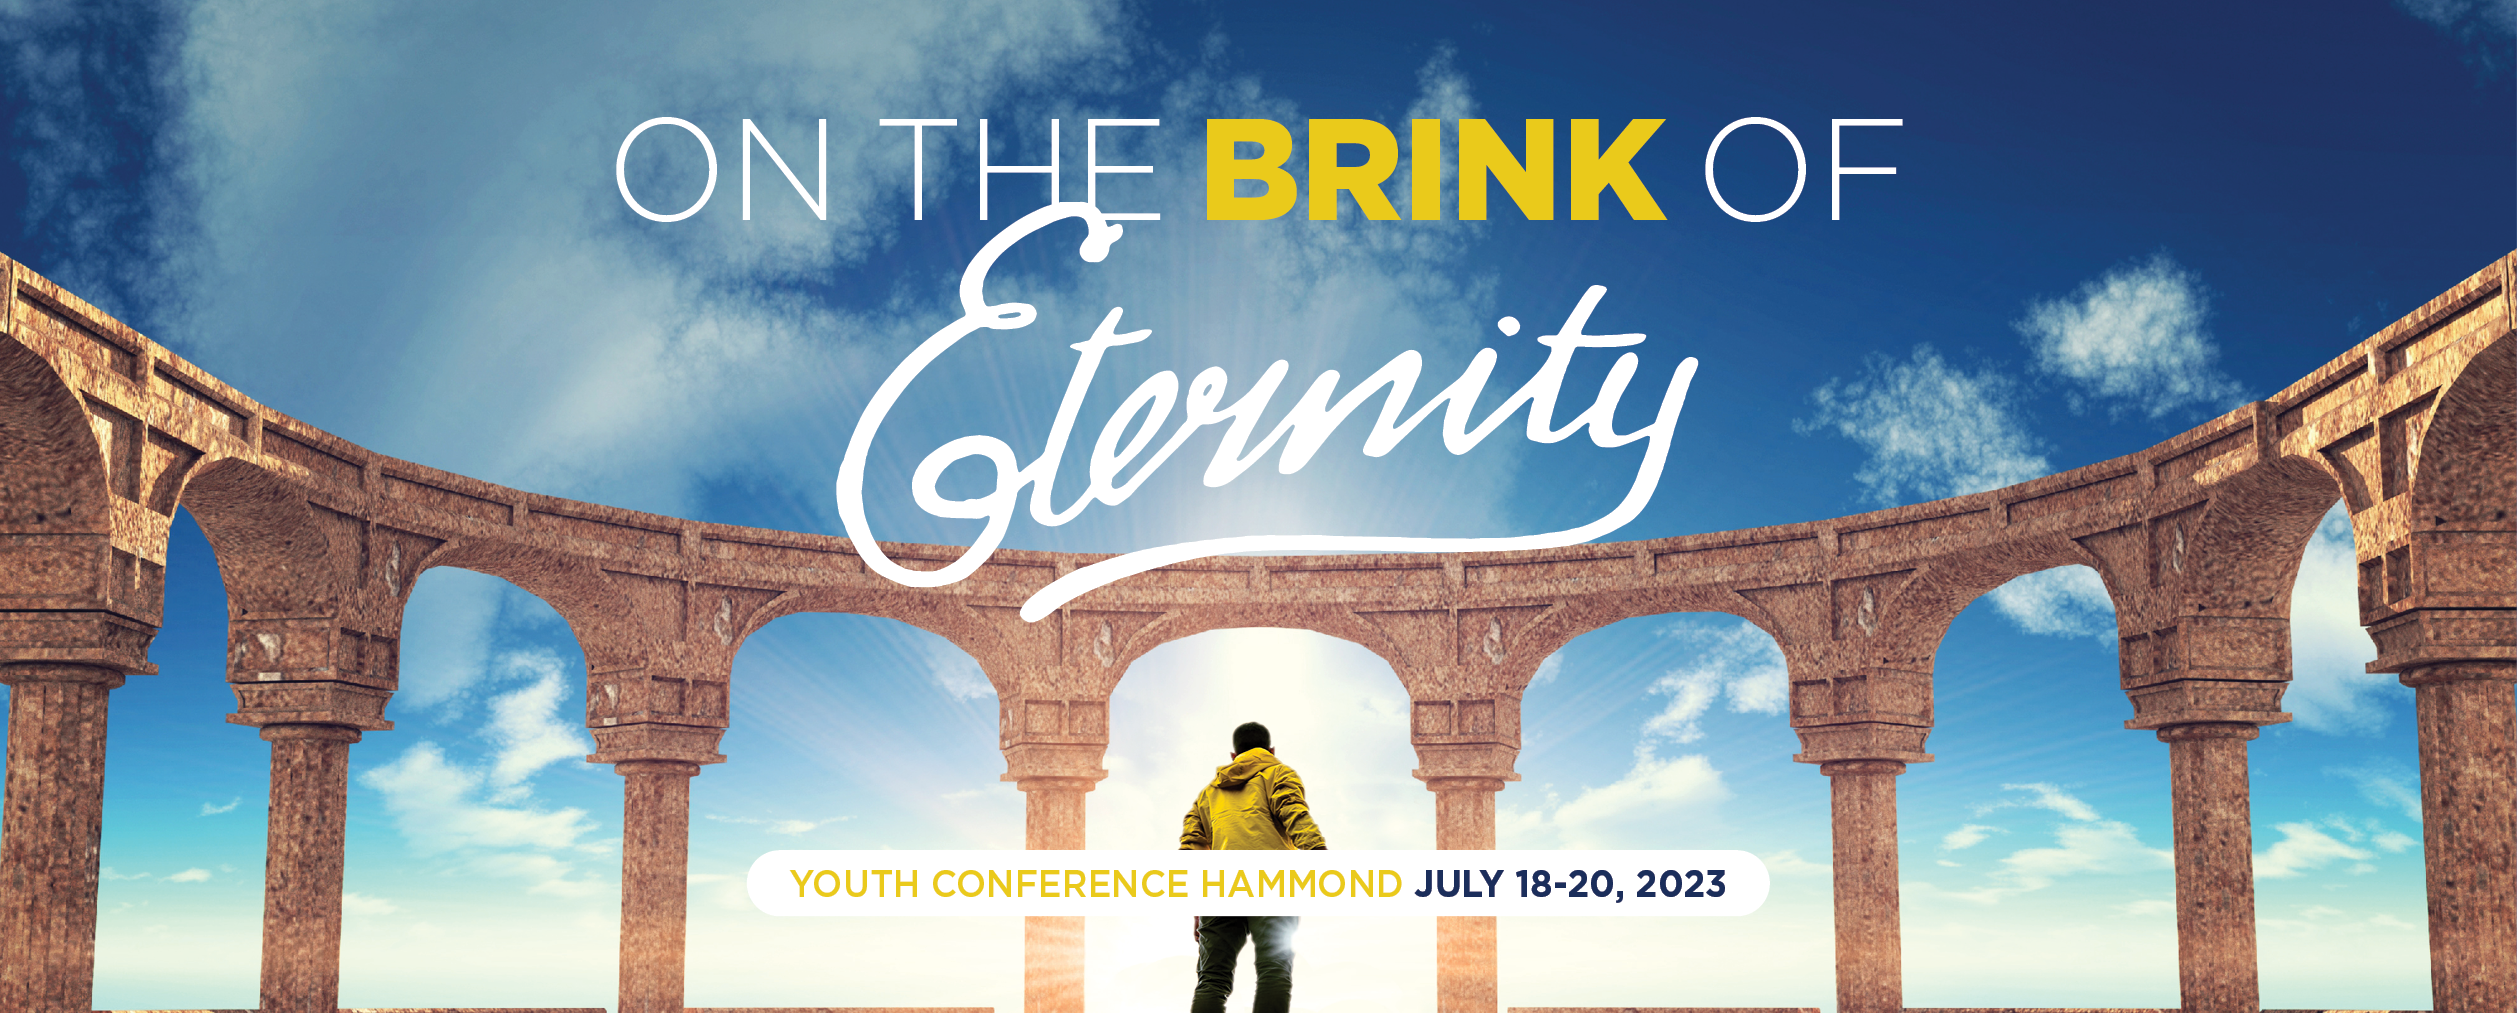 2023 Youth Conference